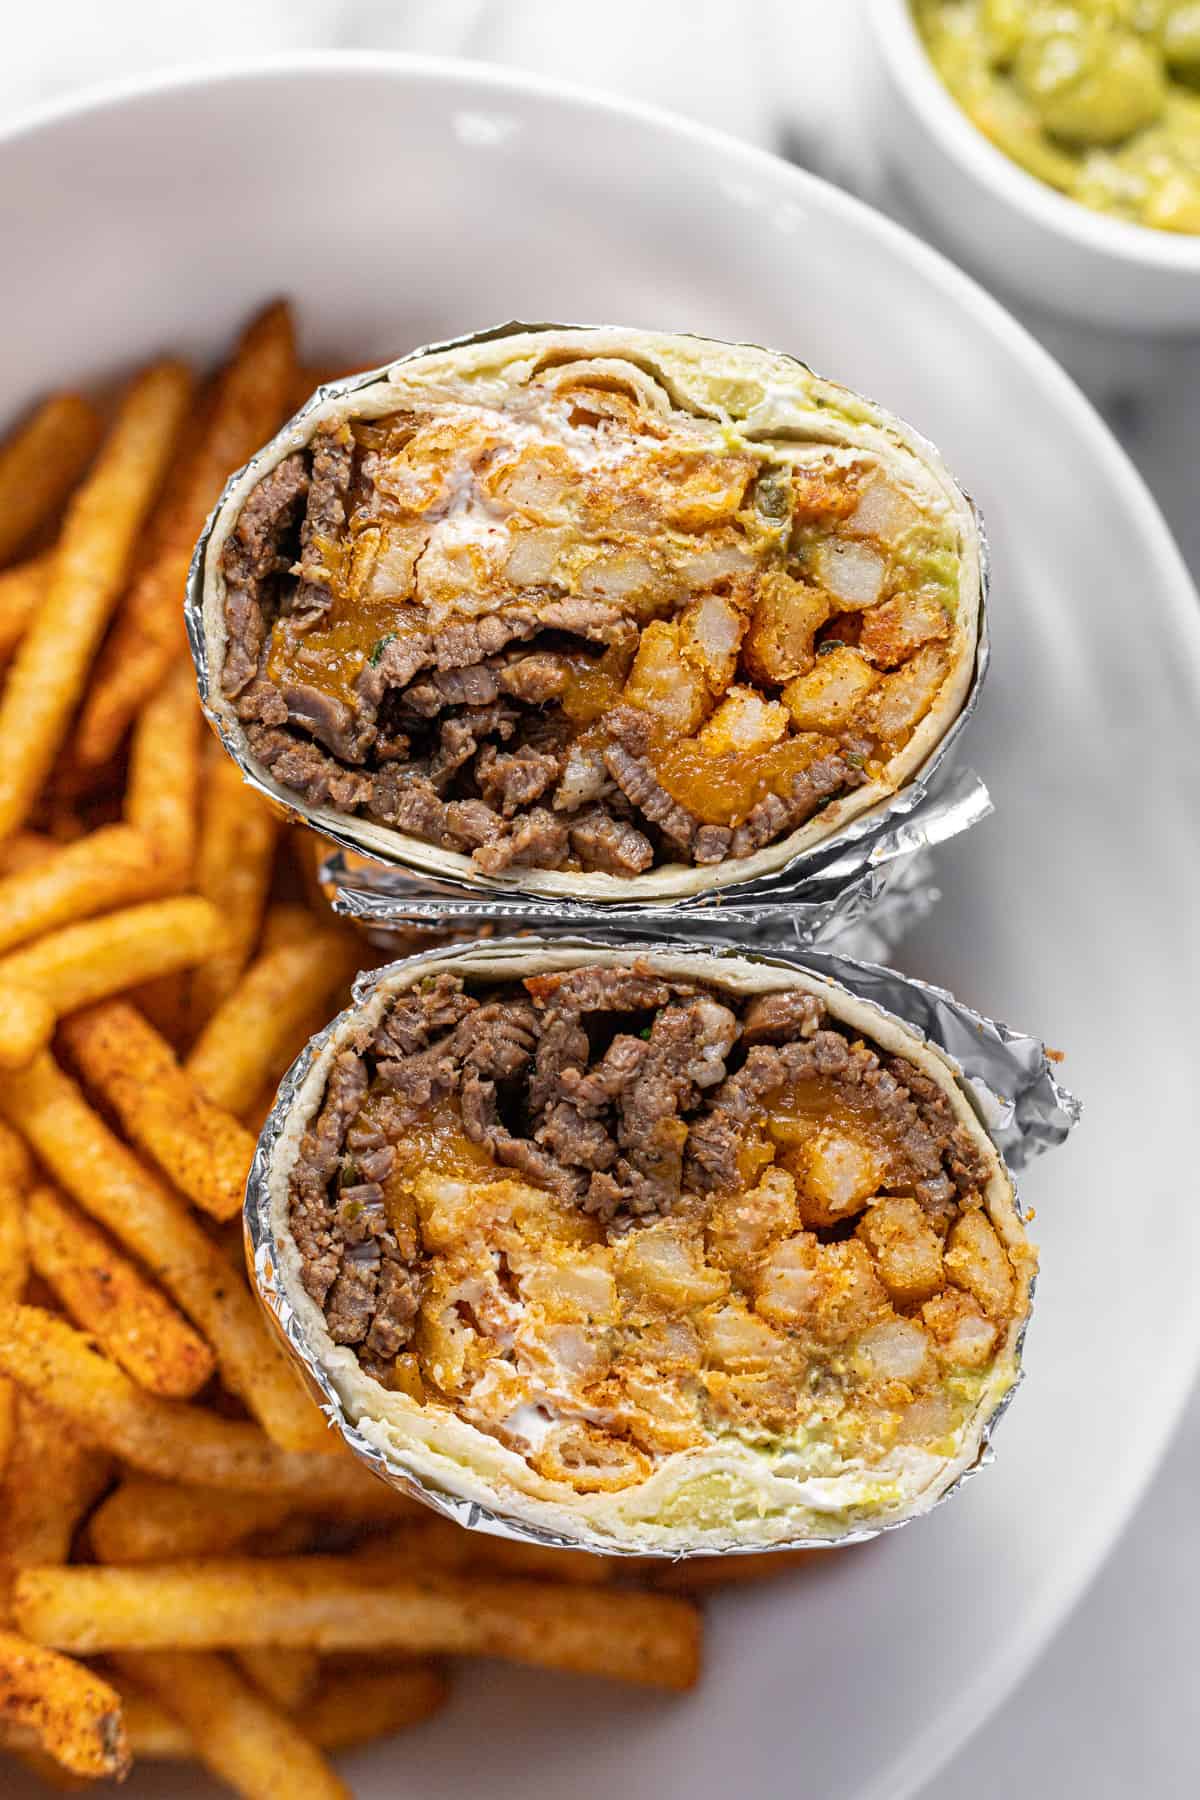 Close up shot of a California burrito cut in half with French fries in the background.